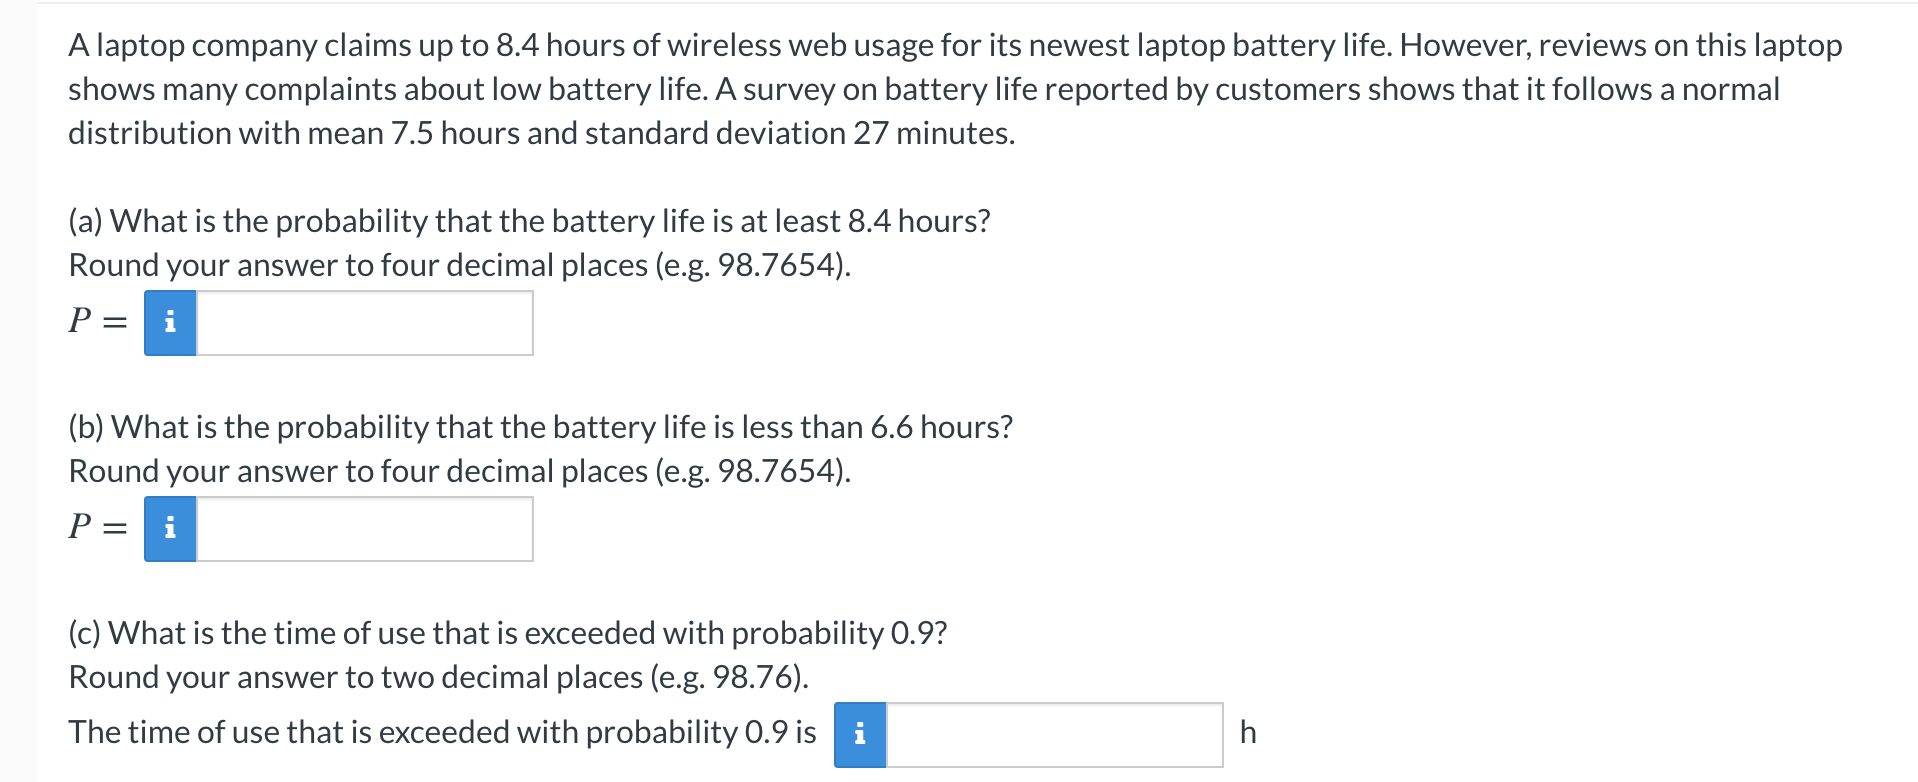 (a) What is the probability that the battery life is at least 8.4 hours?
Round your answer to four decimal places (e.g. 98.7654).
P
i
(b) What is the probability that the battery life is less than 6.6 hours?
Round your answer to four decimal places (e.g. 98.7654).
P = i
(c) What is the time of use that is exceeded with probability 0.9?
Round your answer to two decimal places (e.g. 98.76).
The time of use that is exceeded with probability 0.9 is i
h
